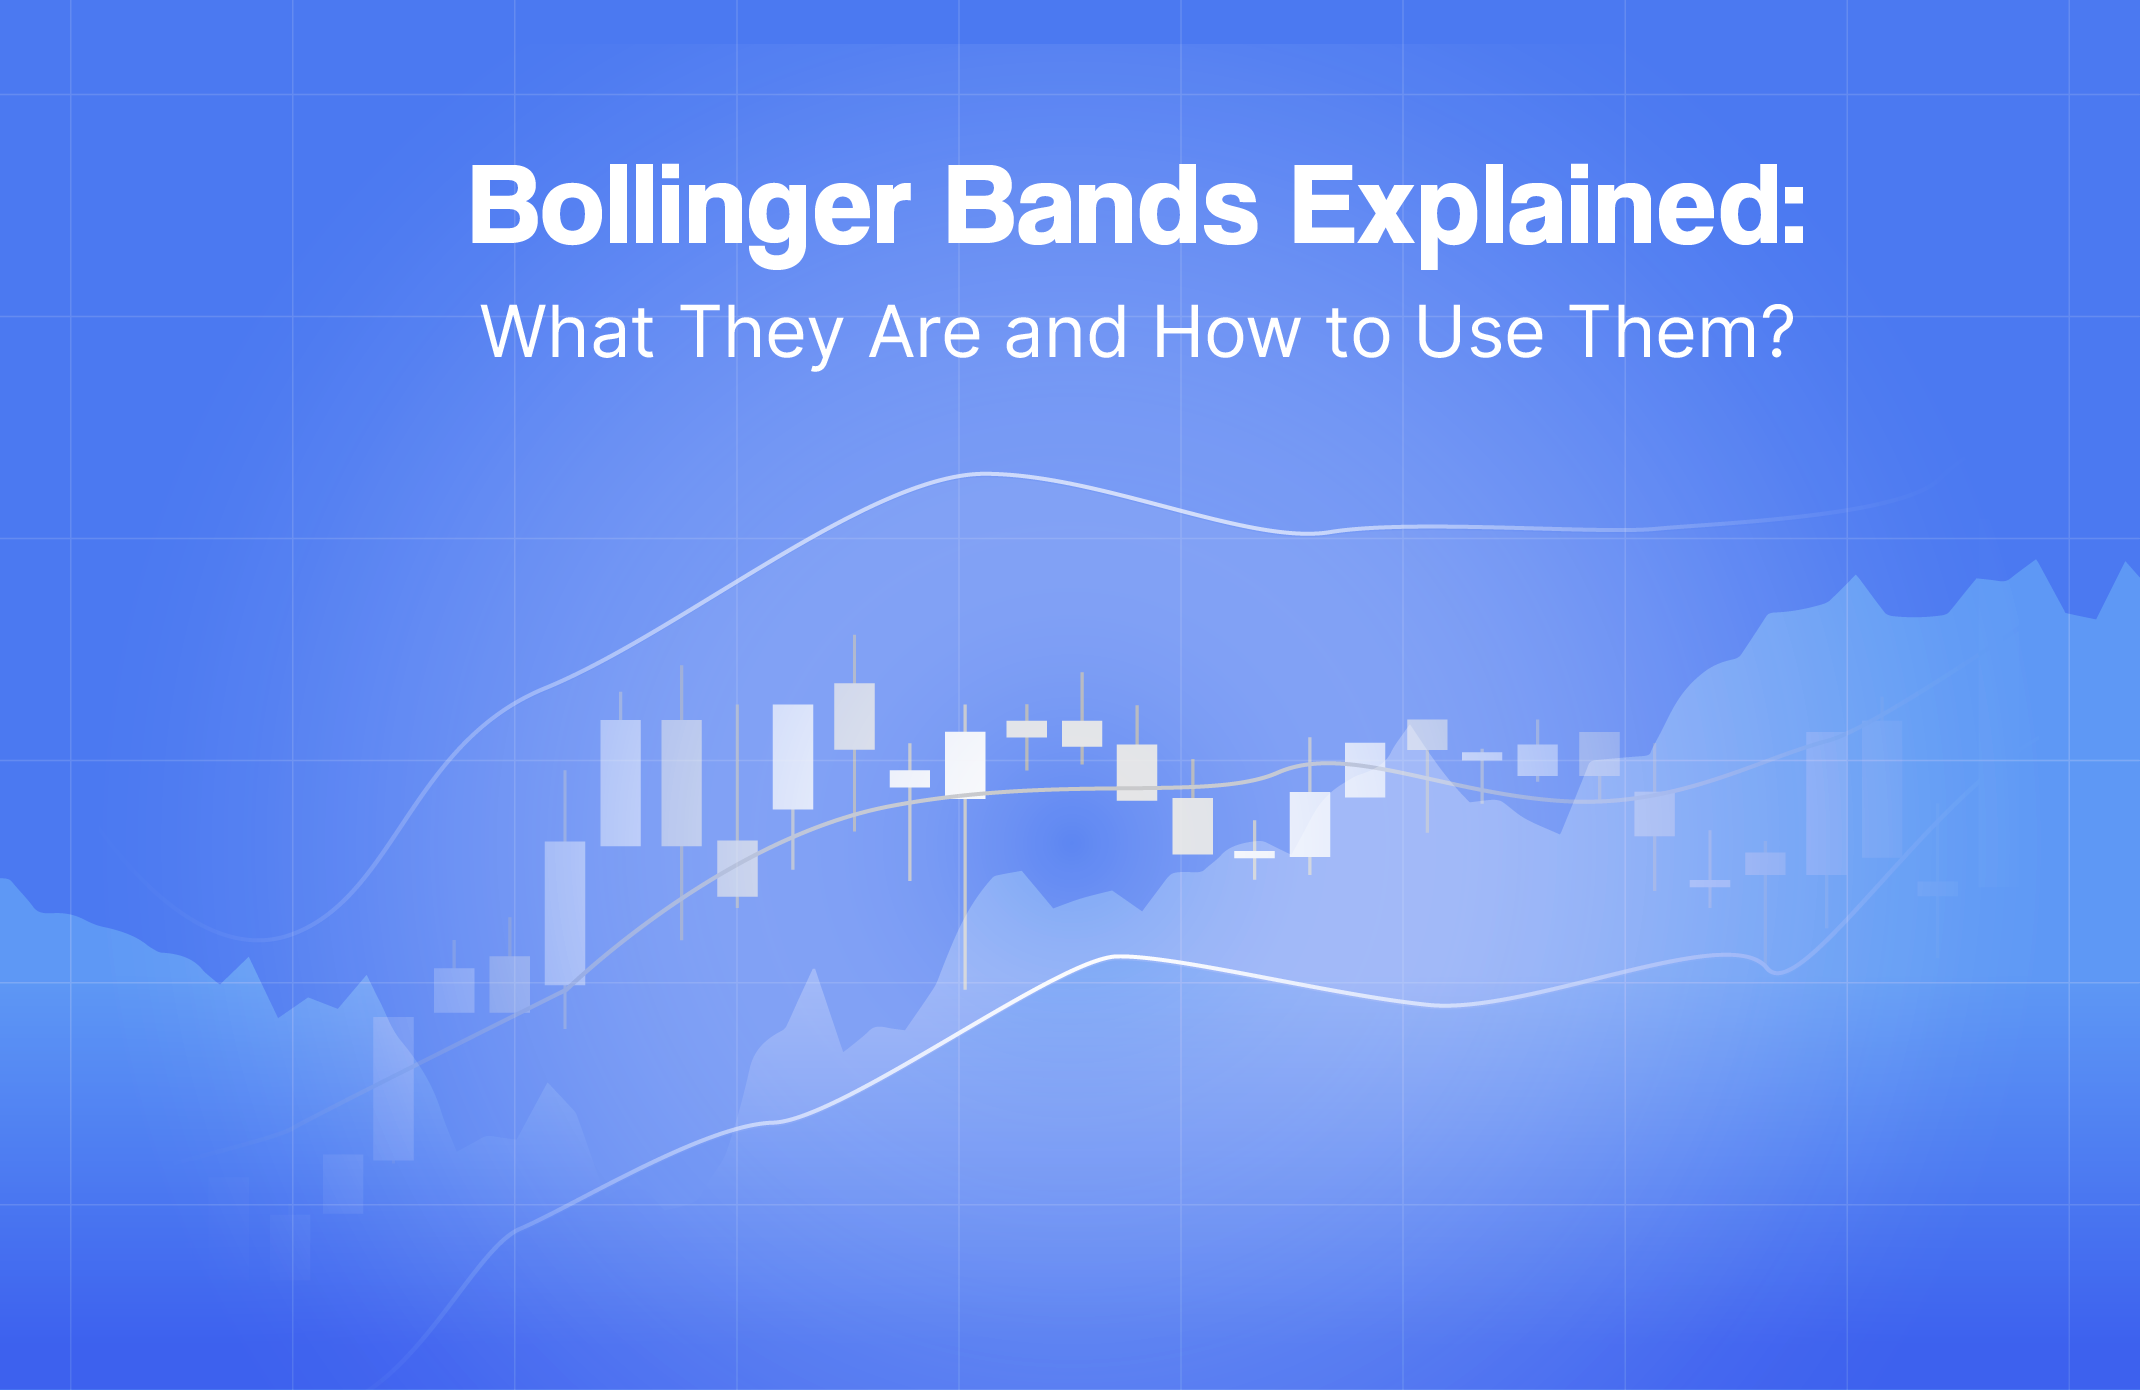 Bollinger Bands Explained: What They Are and How to Use Them?